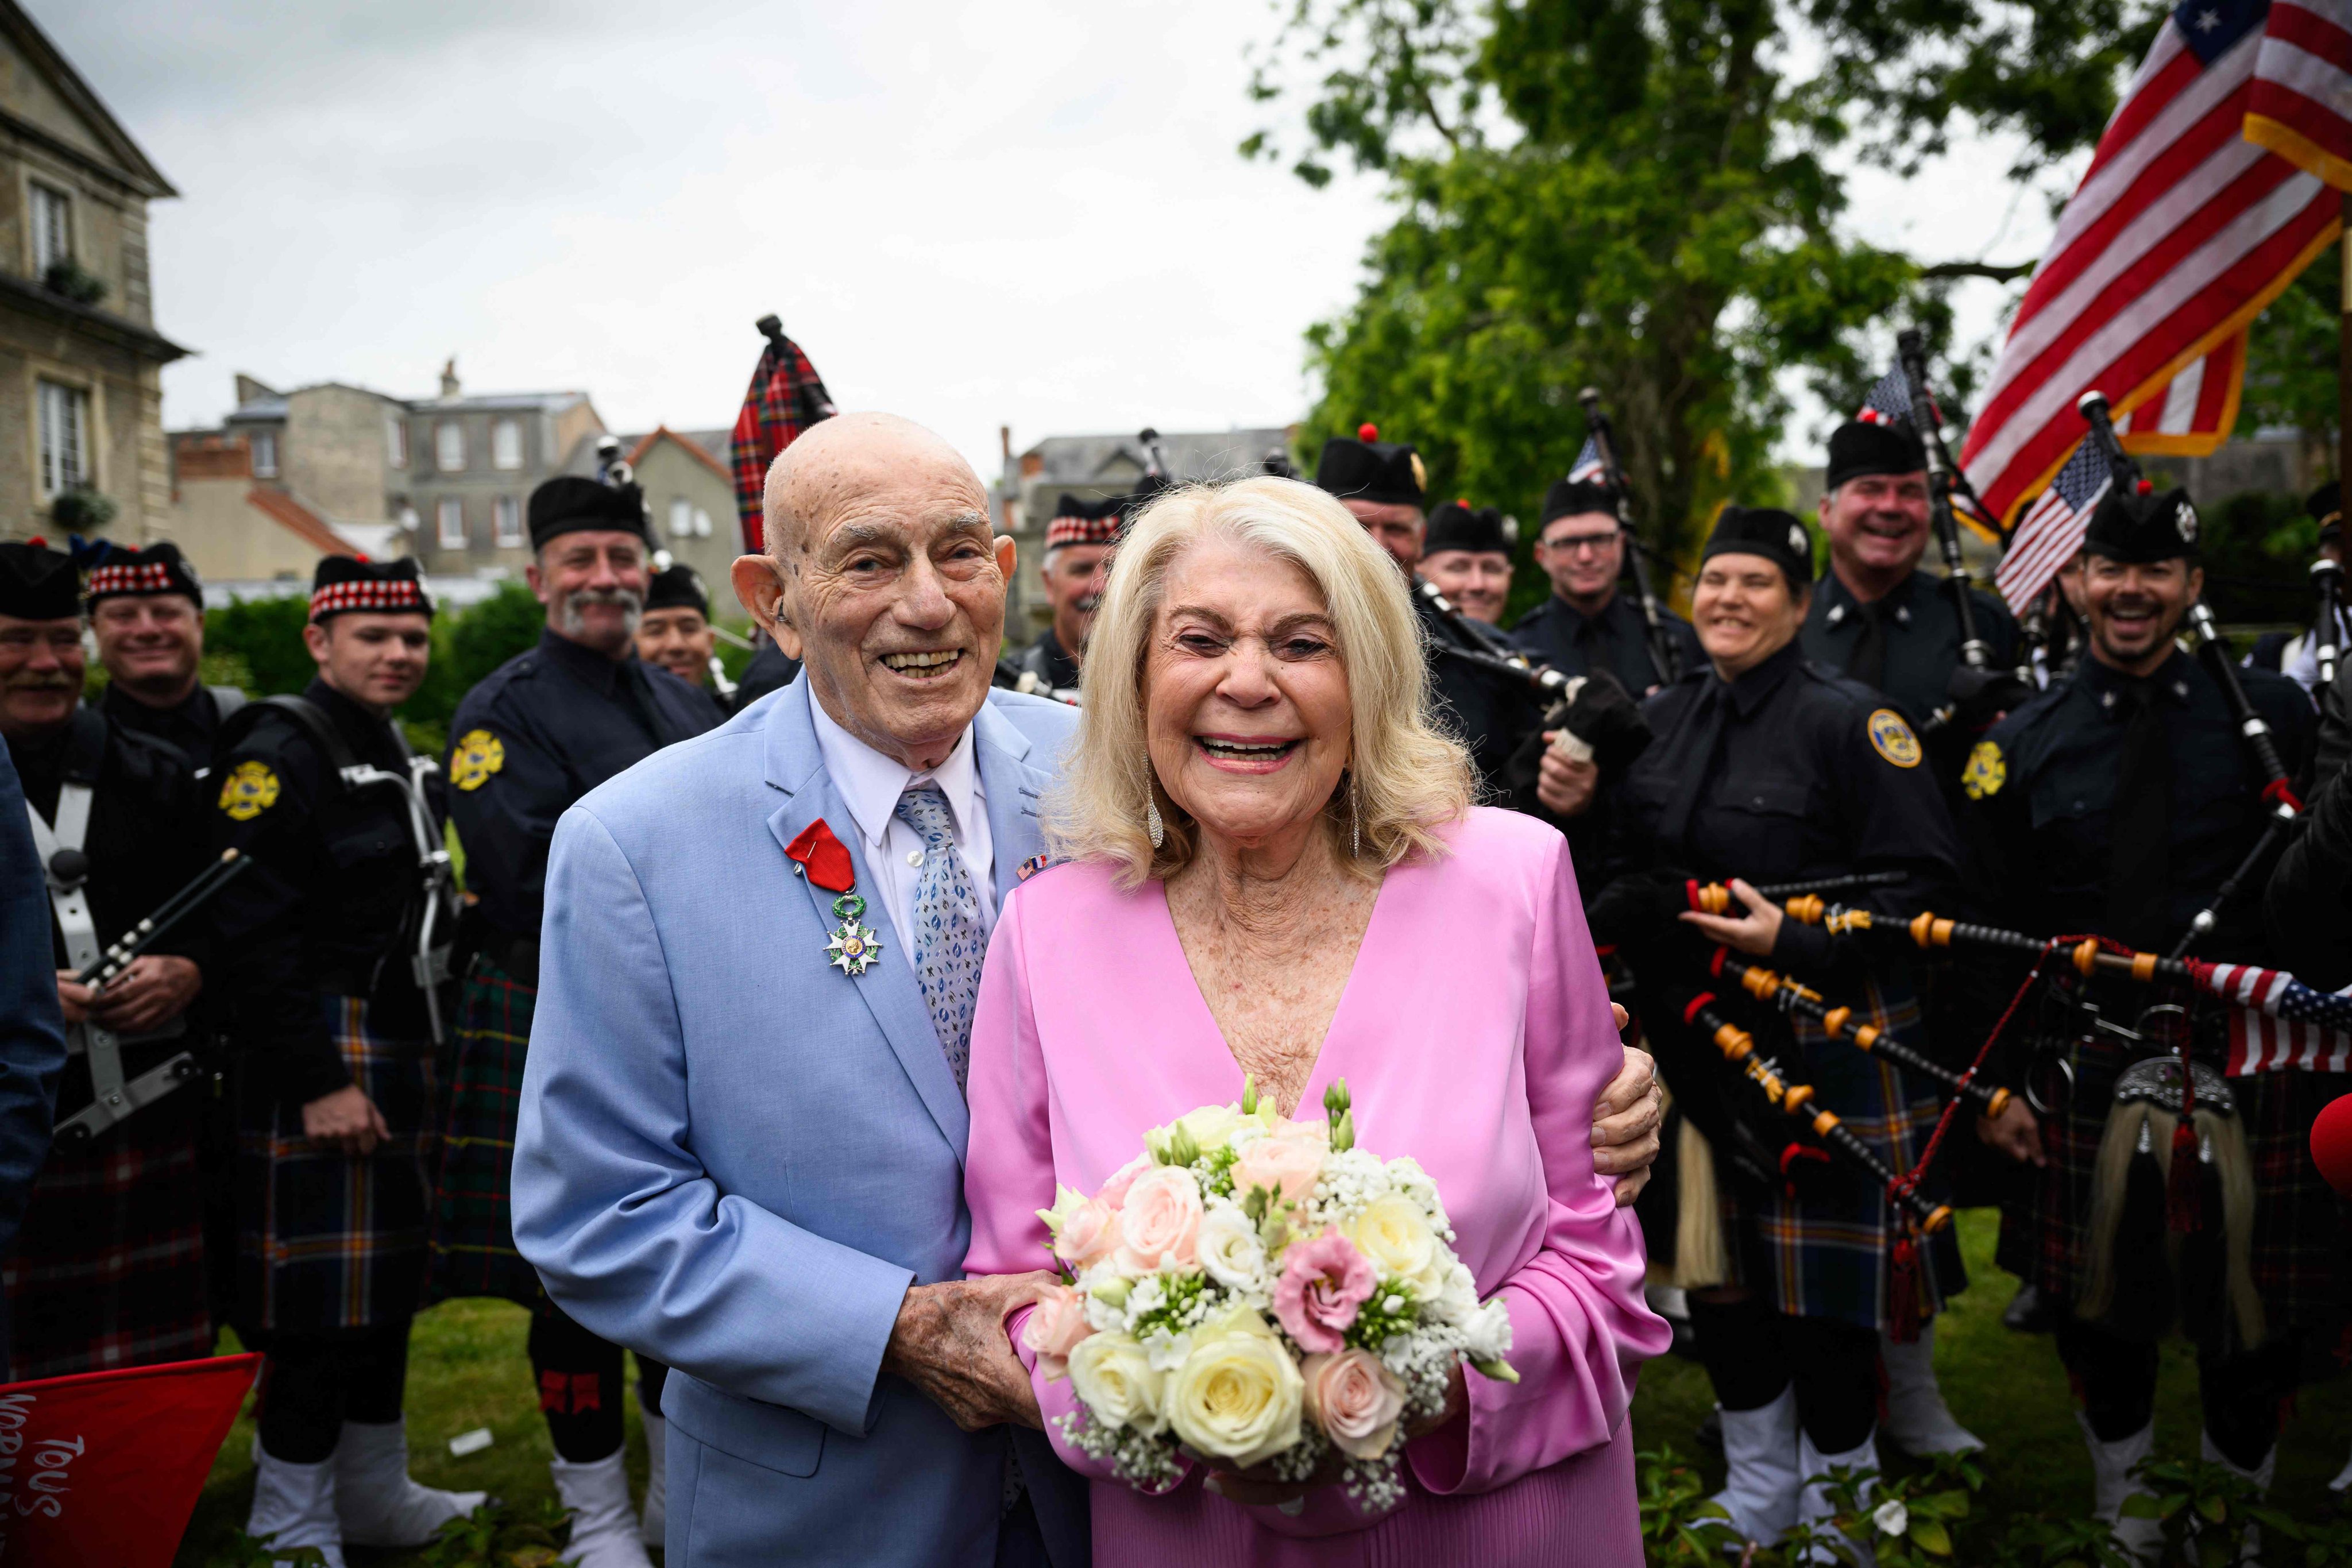 Newlyweds Jeanne Swerlin and US WWII veteran Harold Terens pose for photographs in front of a piper band as they celebrate their marriage during a wedding at the town hall of Carentan-les-Marais, in Normandy, northwestern France, on Saturday. Photo: AFP